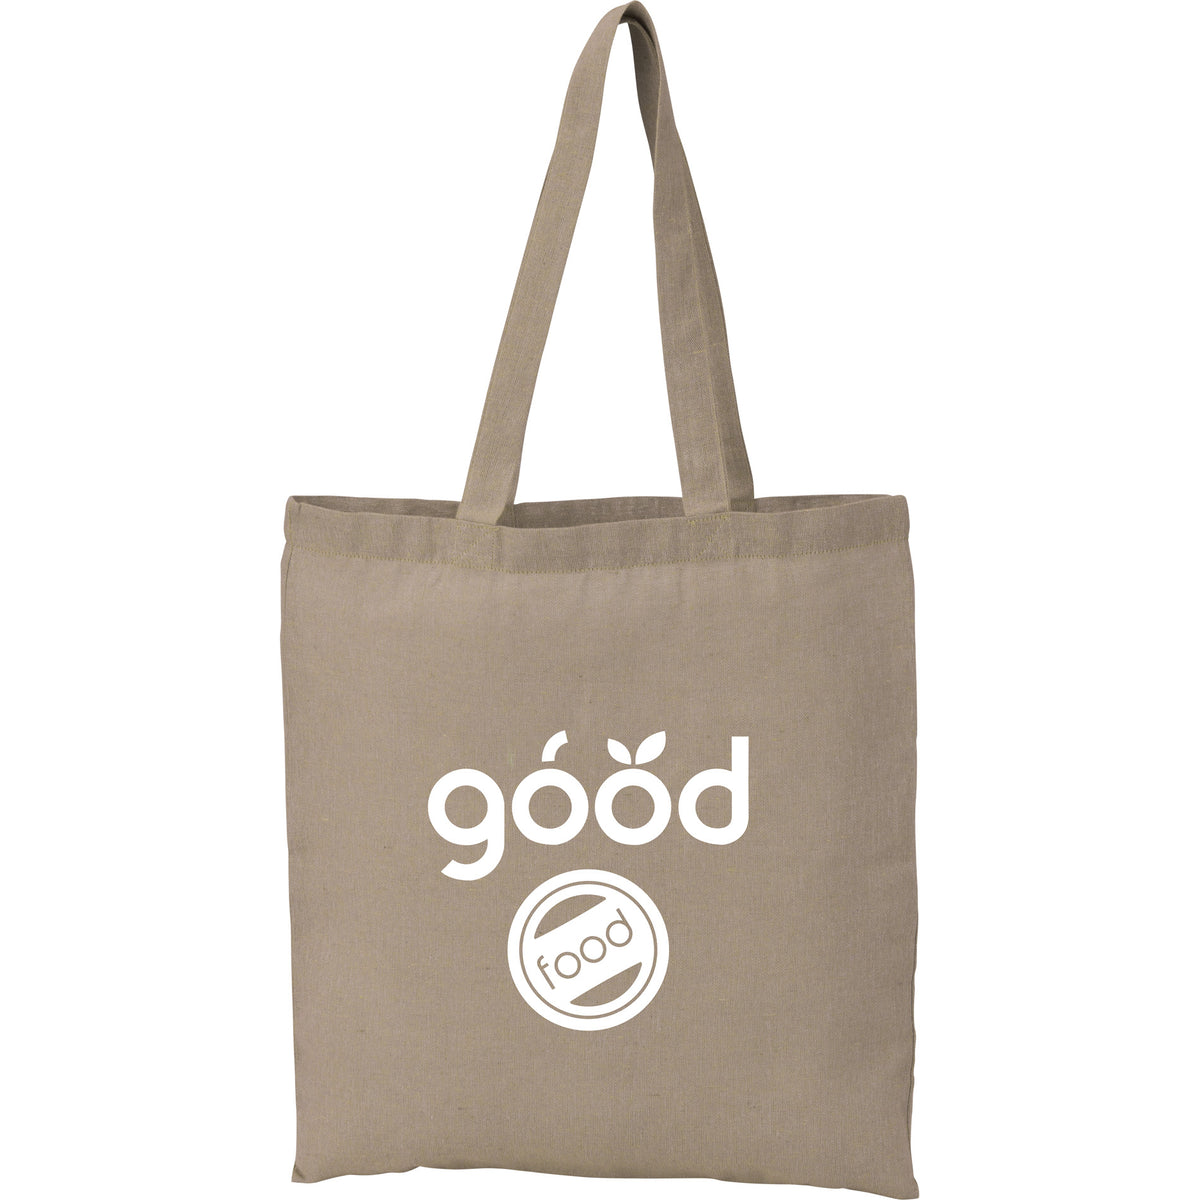 Recycled 5 oz. Cotton Twill Tote